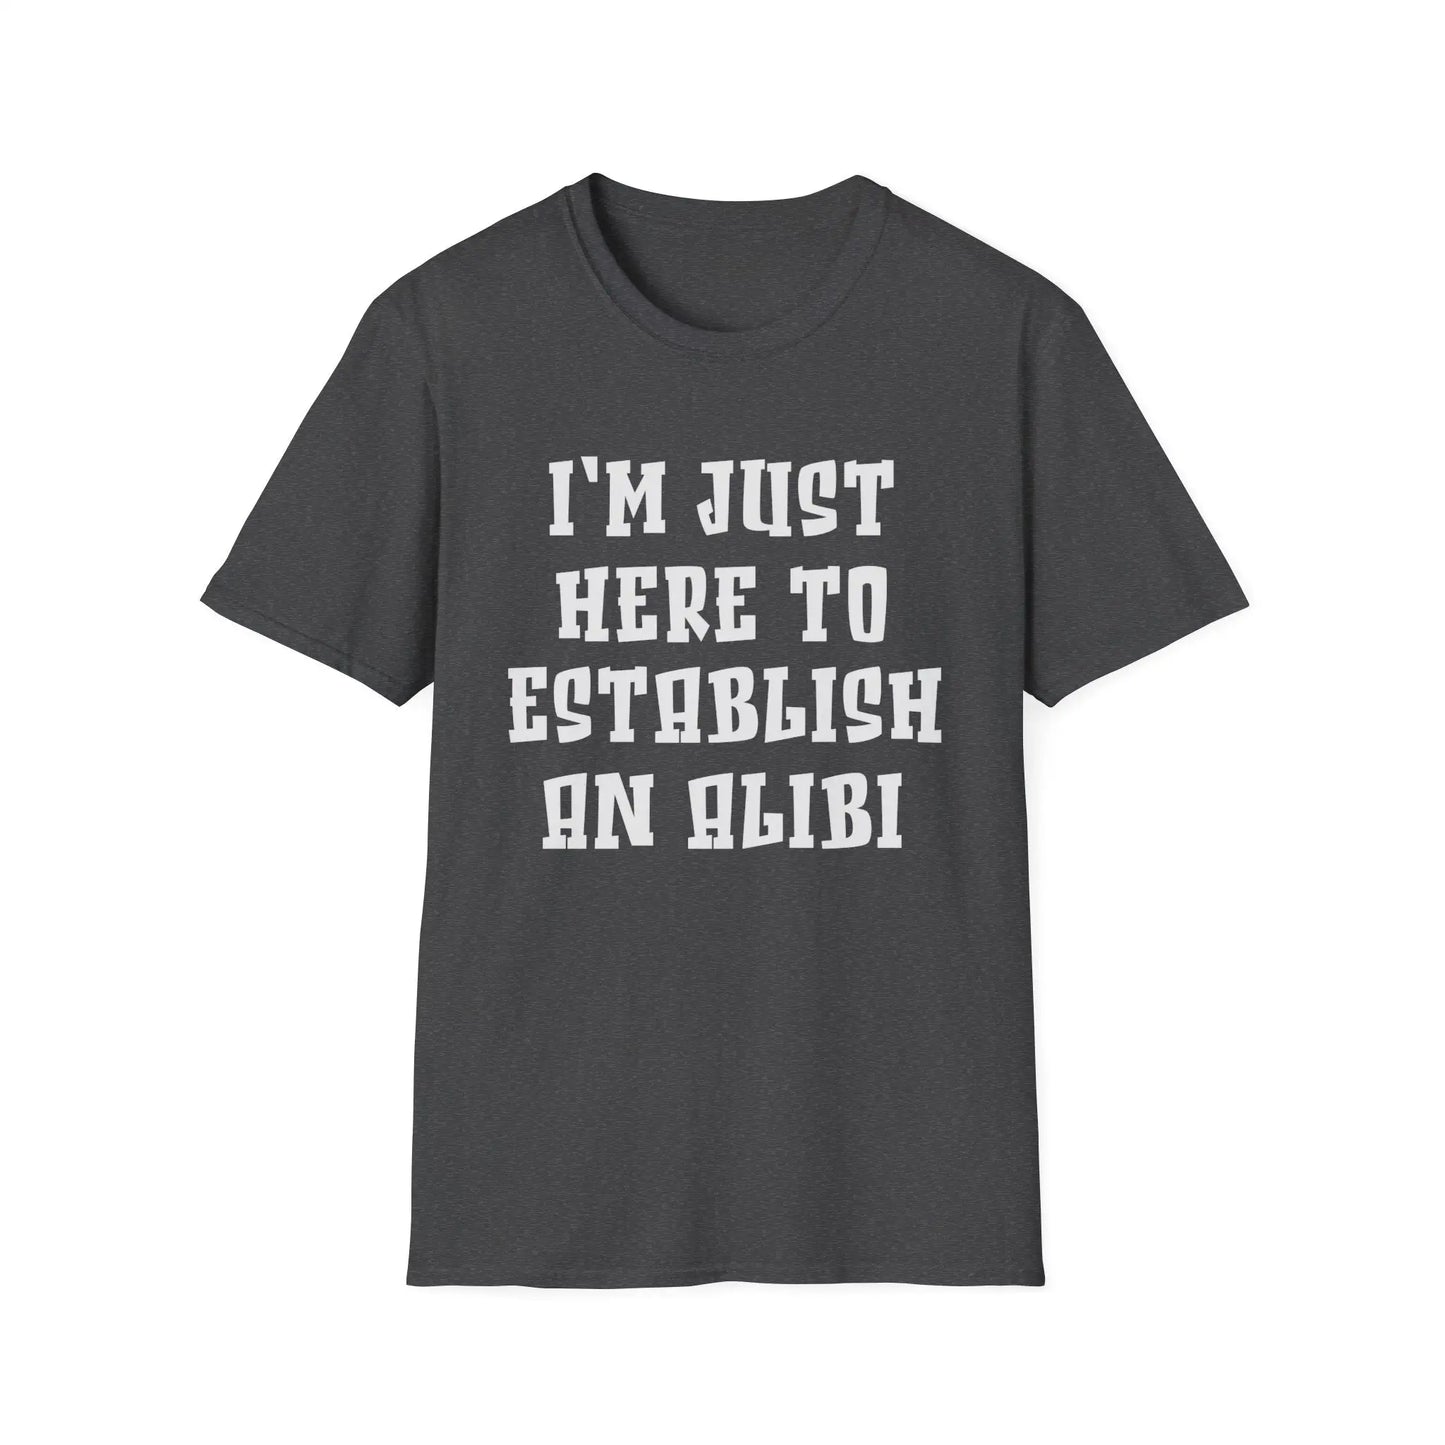 I'm Just Here To Establish An Alibi Women's T-Shirt - Wicked Tees